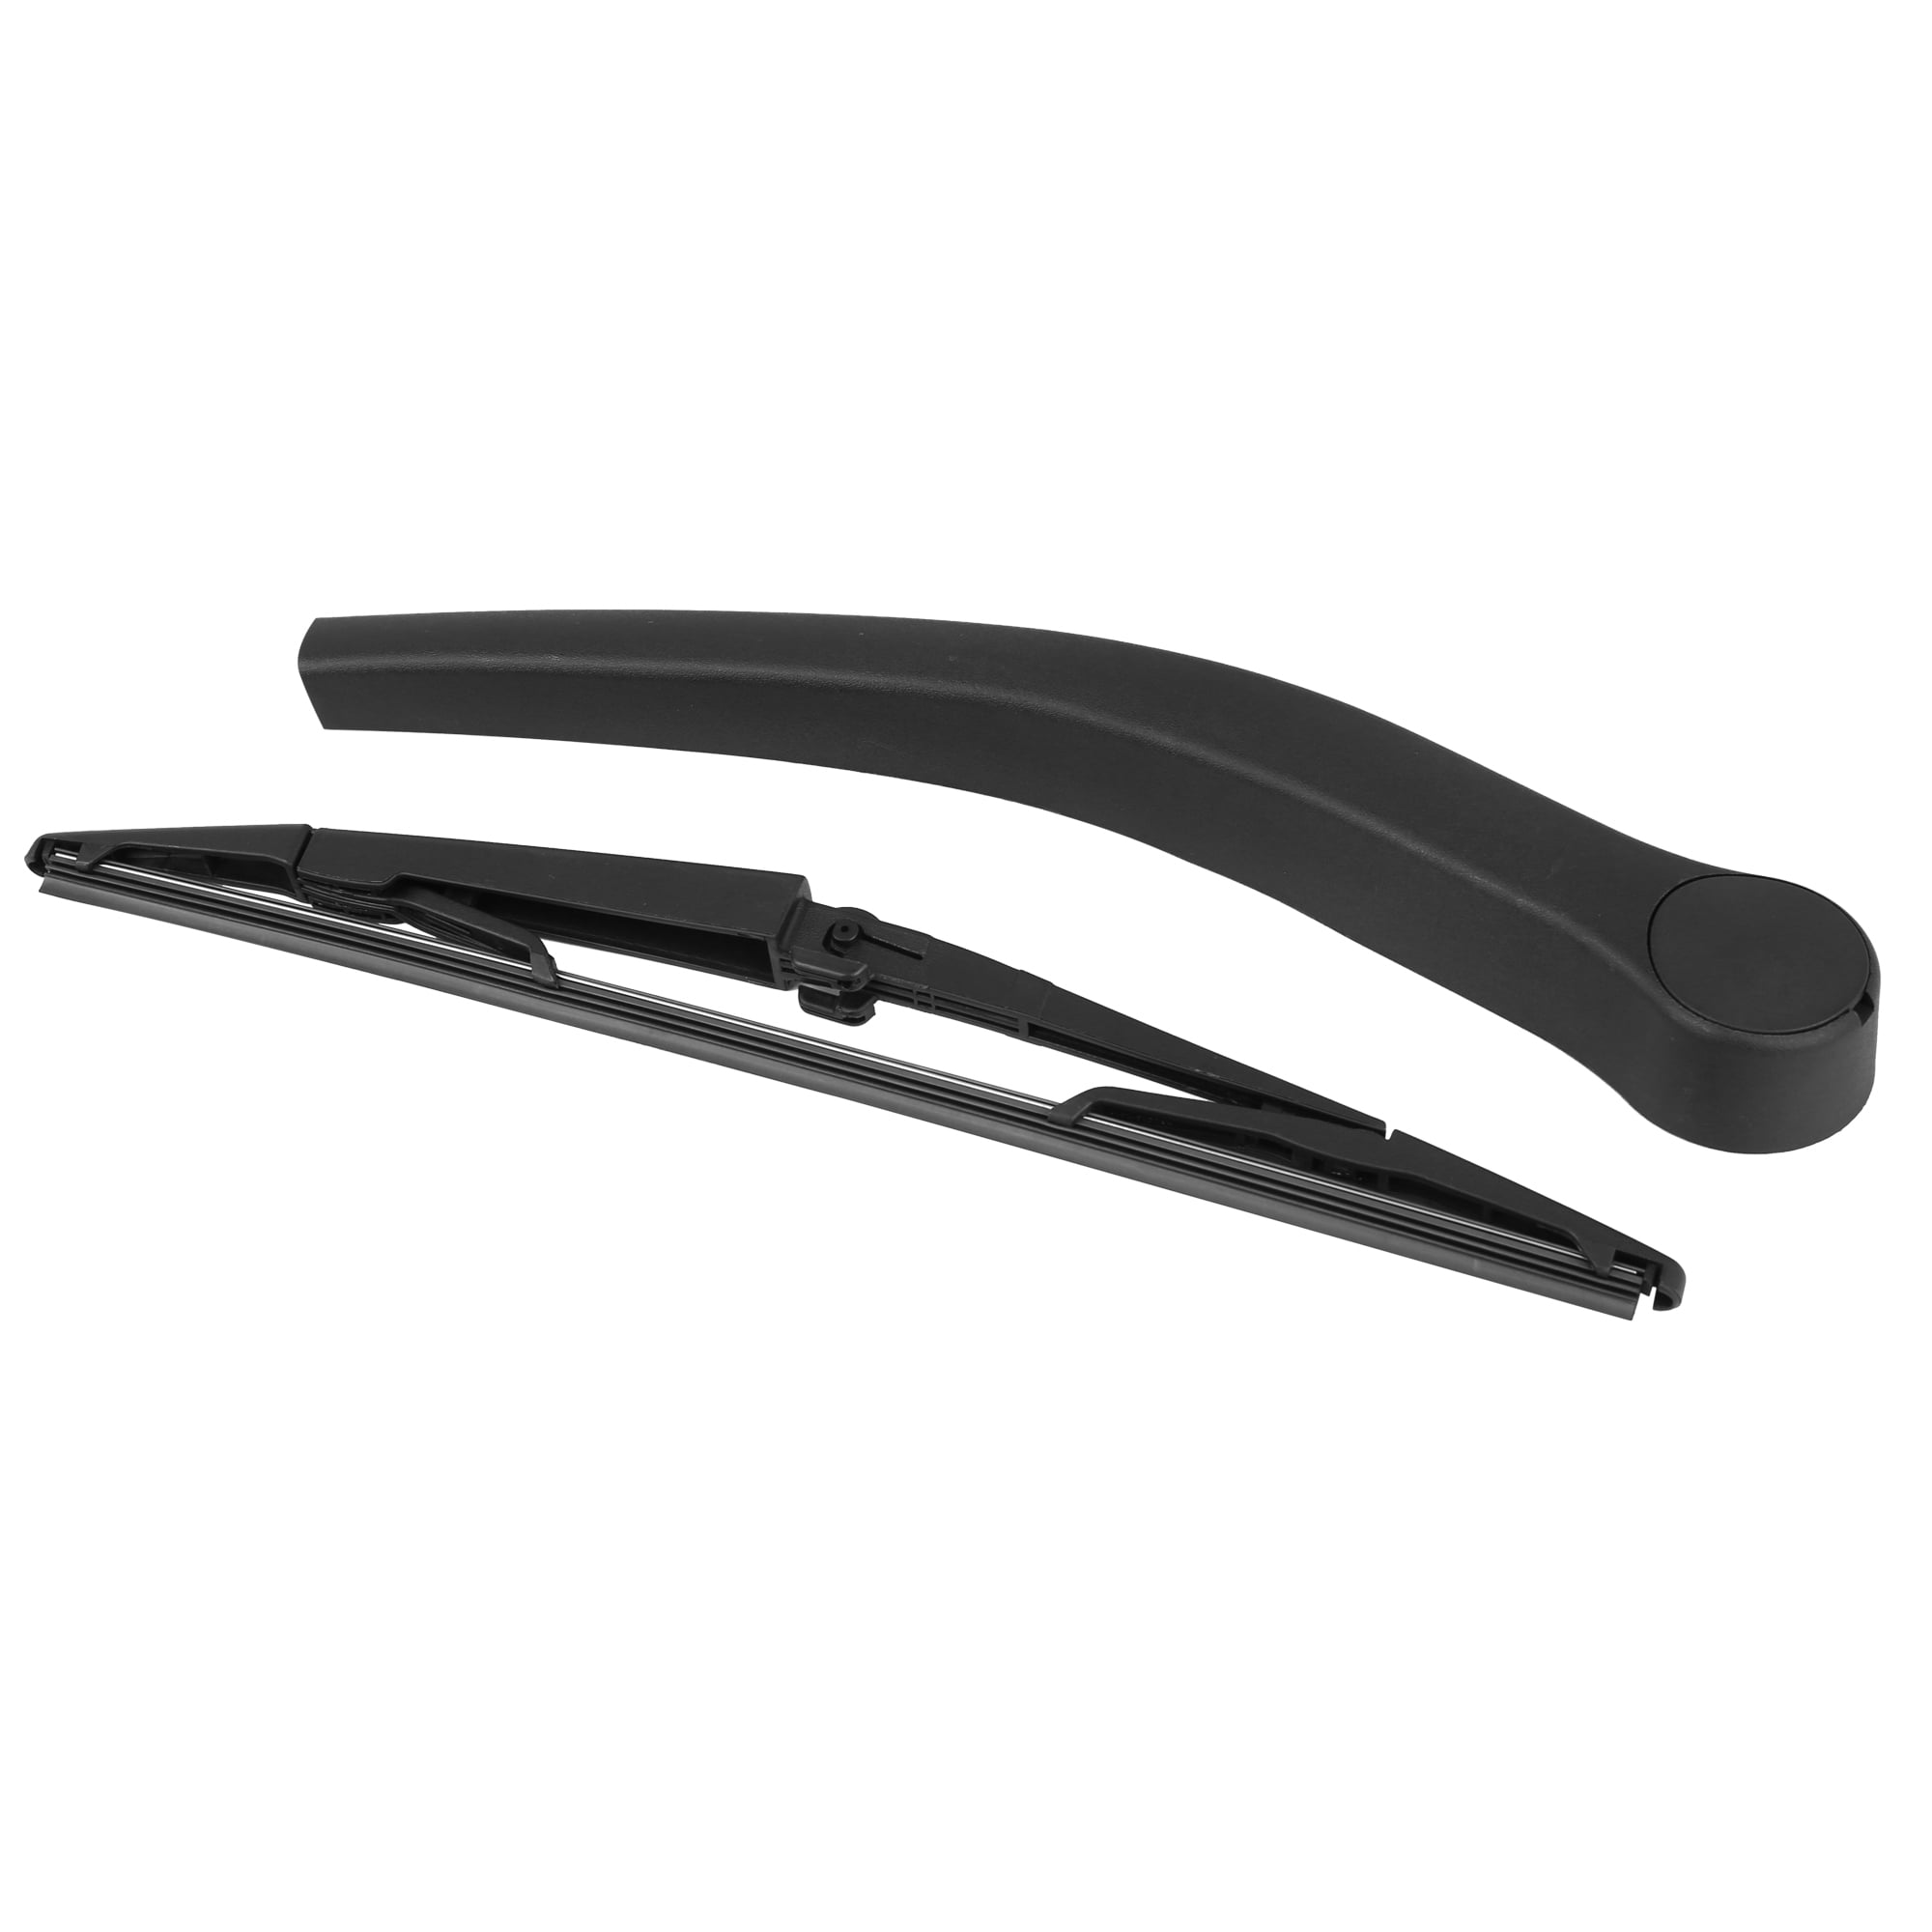 Rear Wiper Blade Fit For MAZDA CX-5 2012-ON 14in /350MM Back Windshield